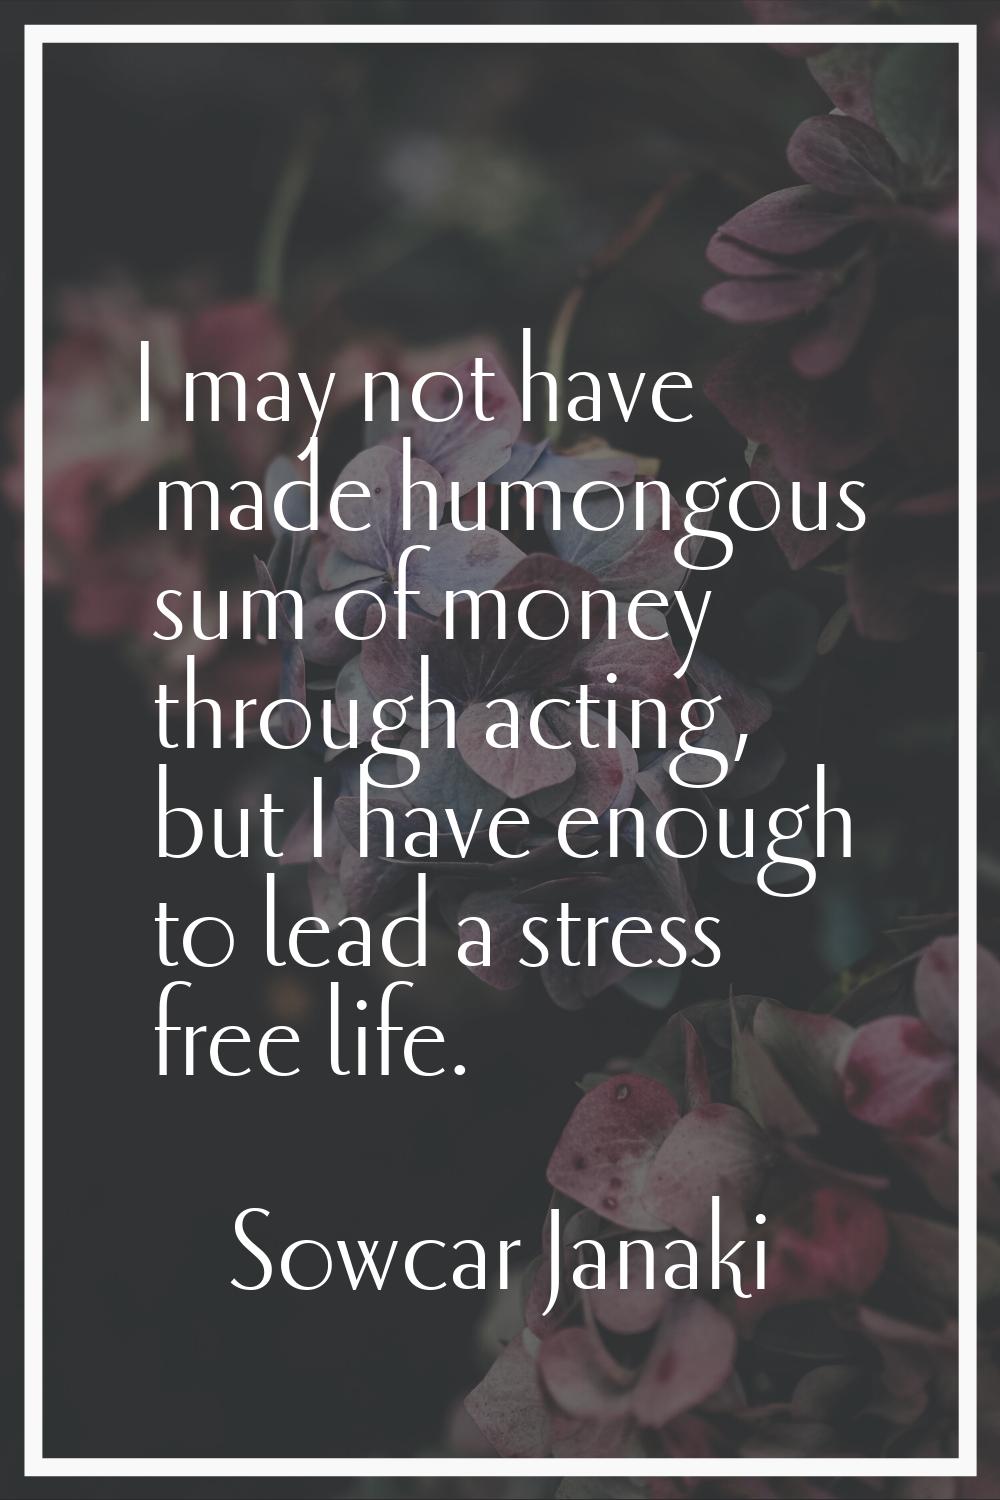 I may not have made humongous sum of money through acting, but I have enough to lead a stress free 